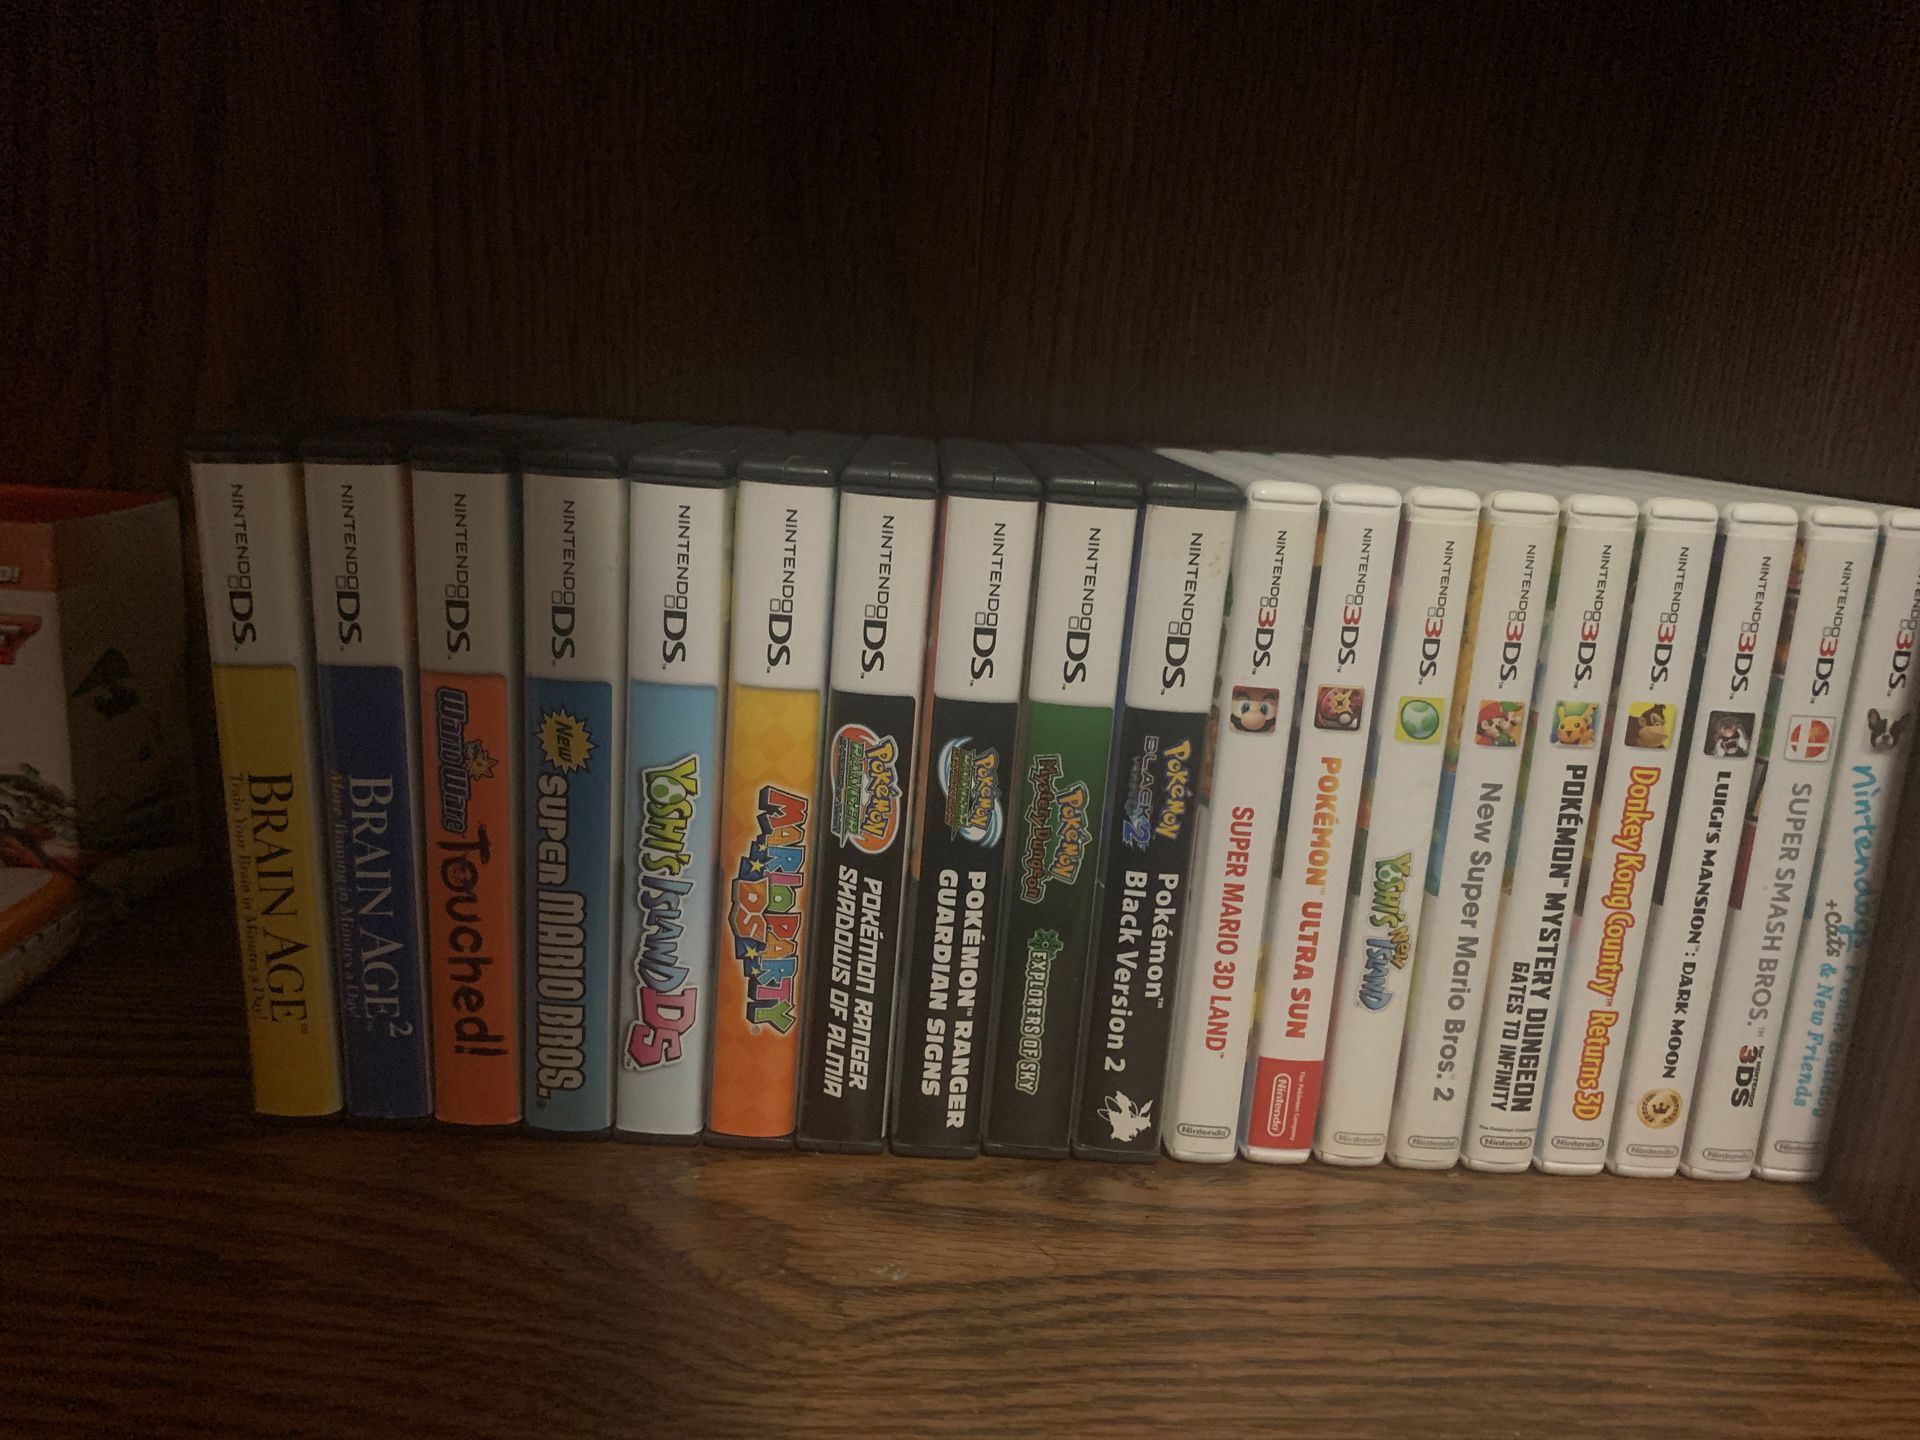 3ds and ds games all complete (ask for prices)